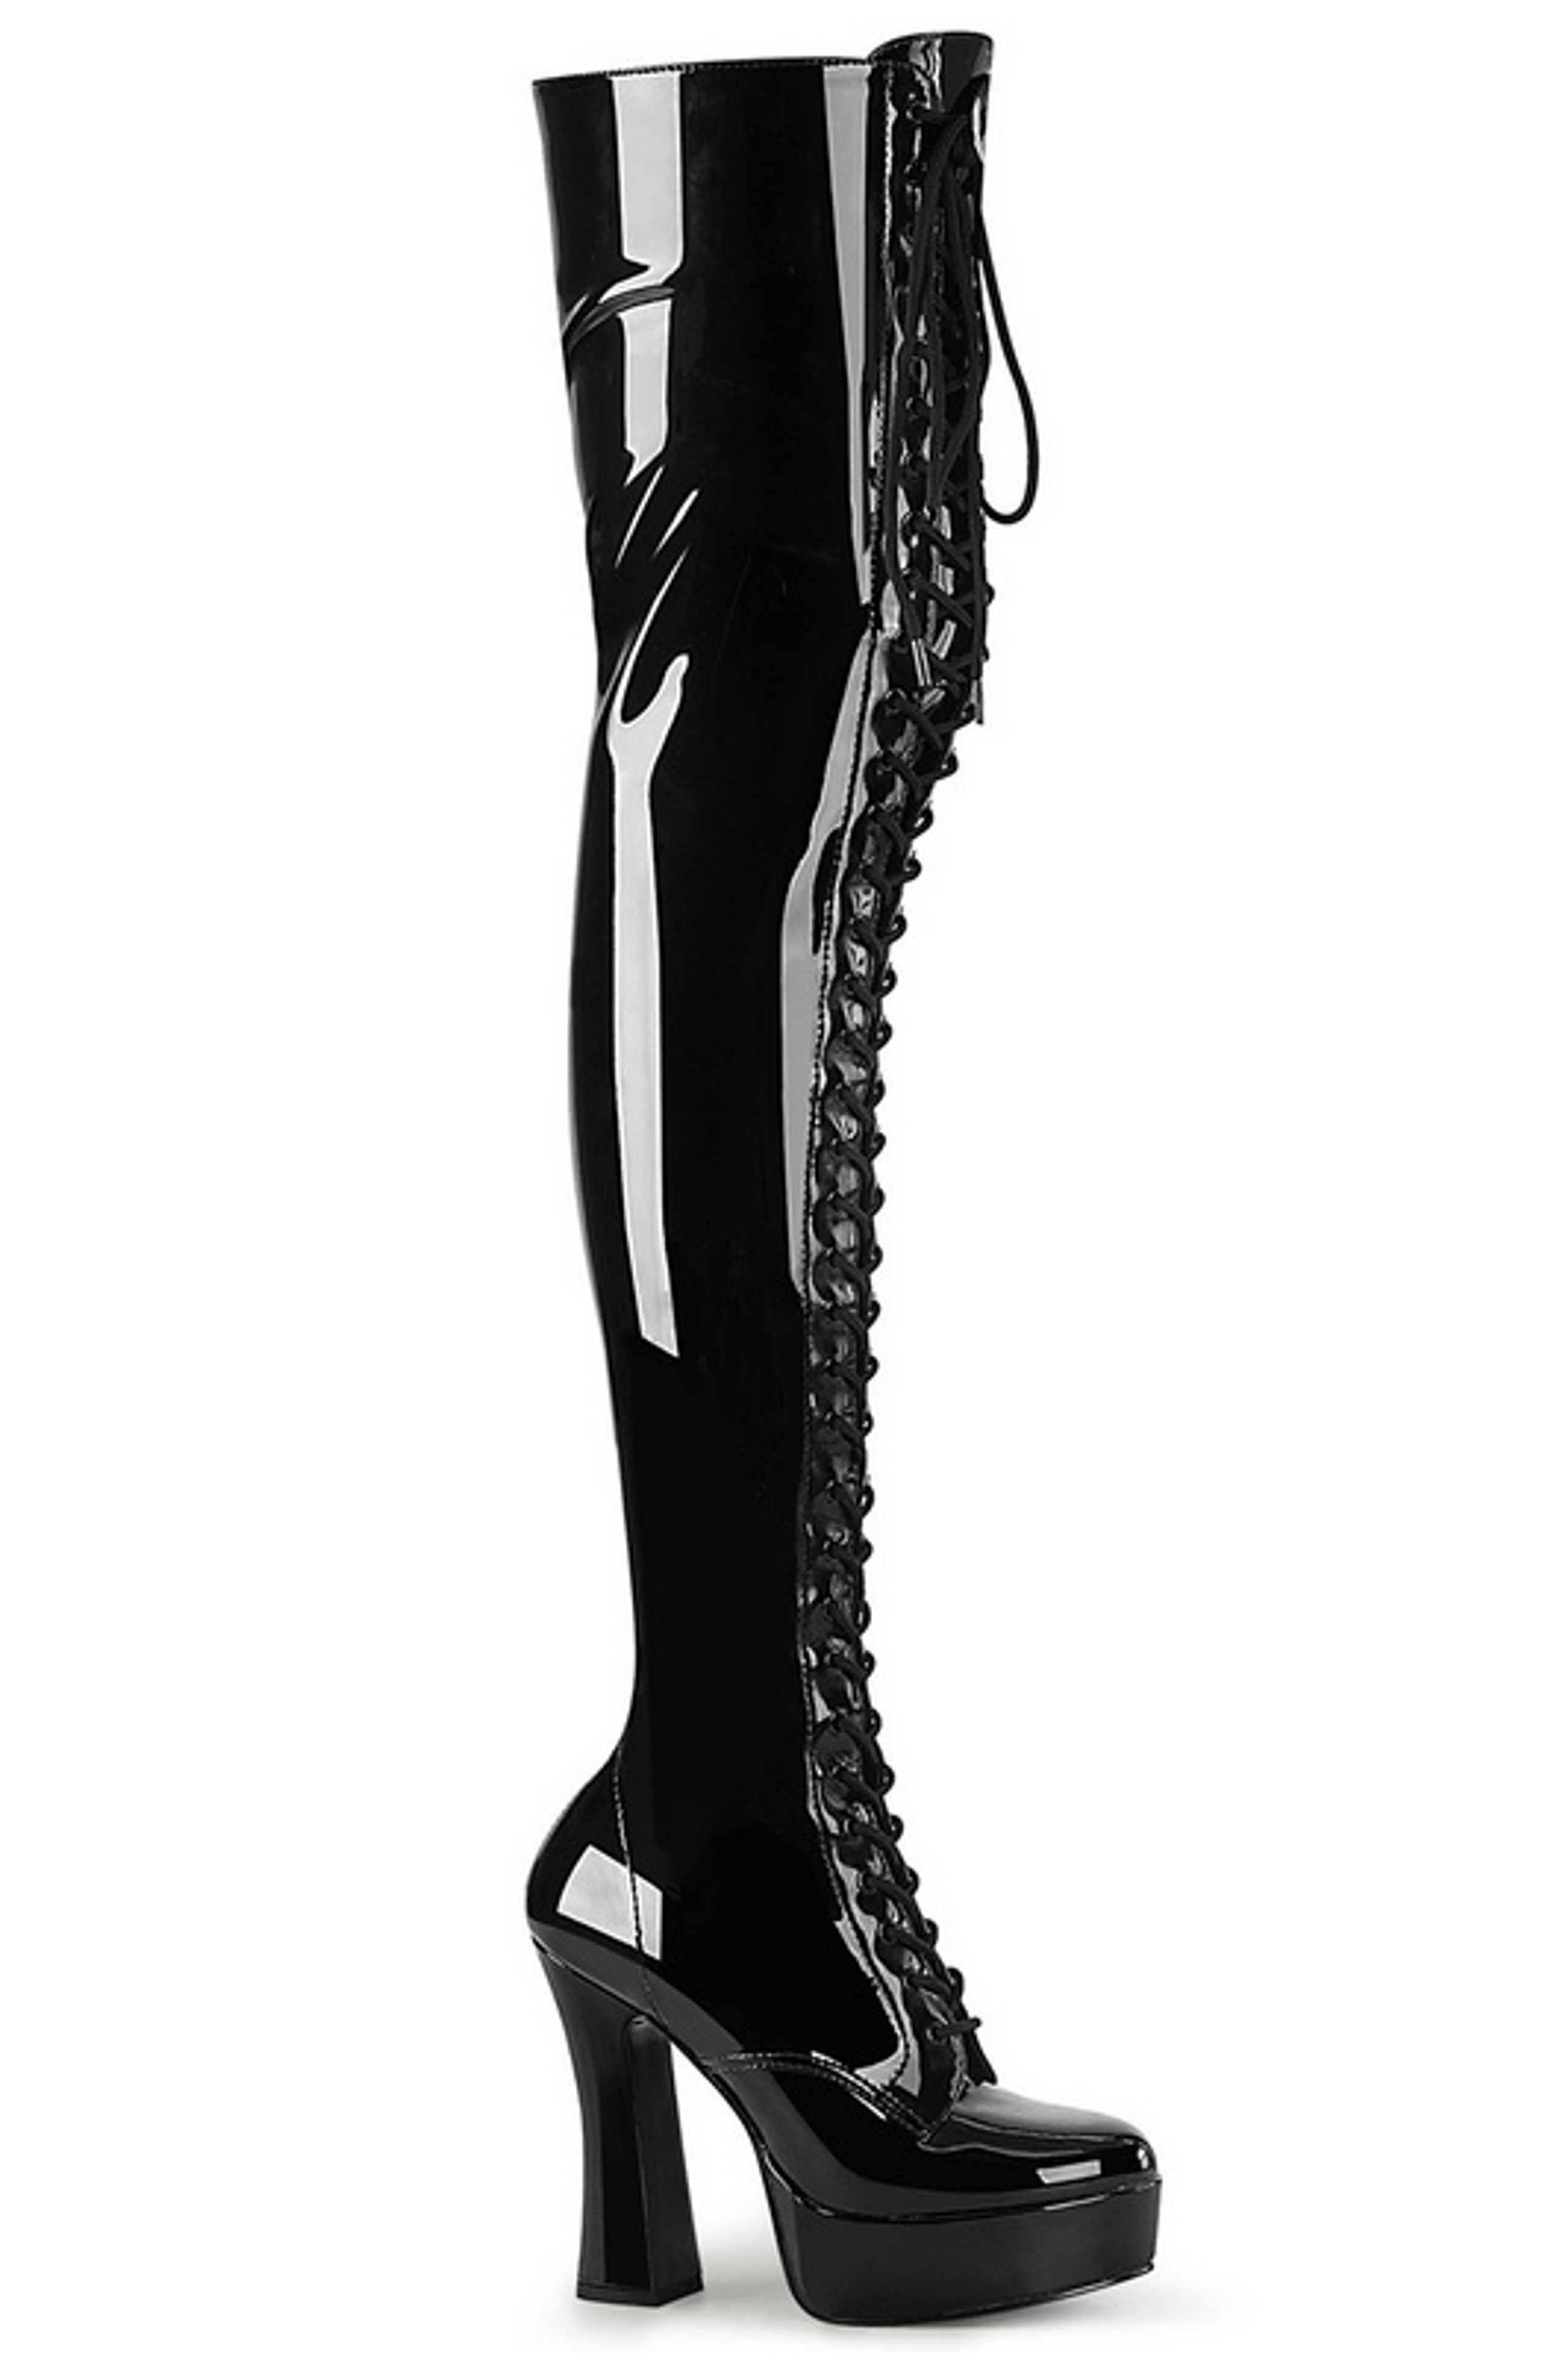 Black Front Lace Up Knee High Patent Boots Spicy Lingerie